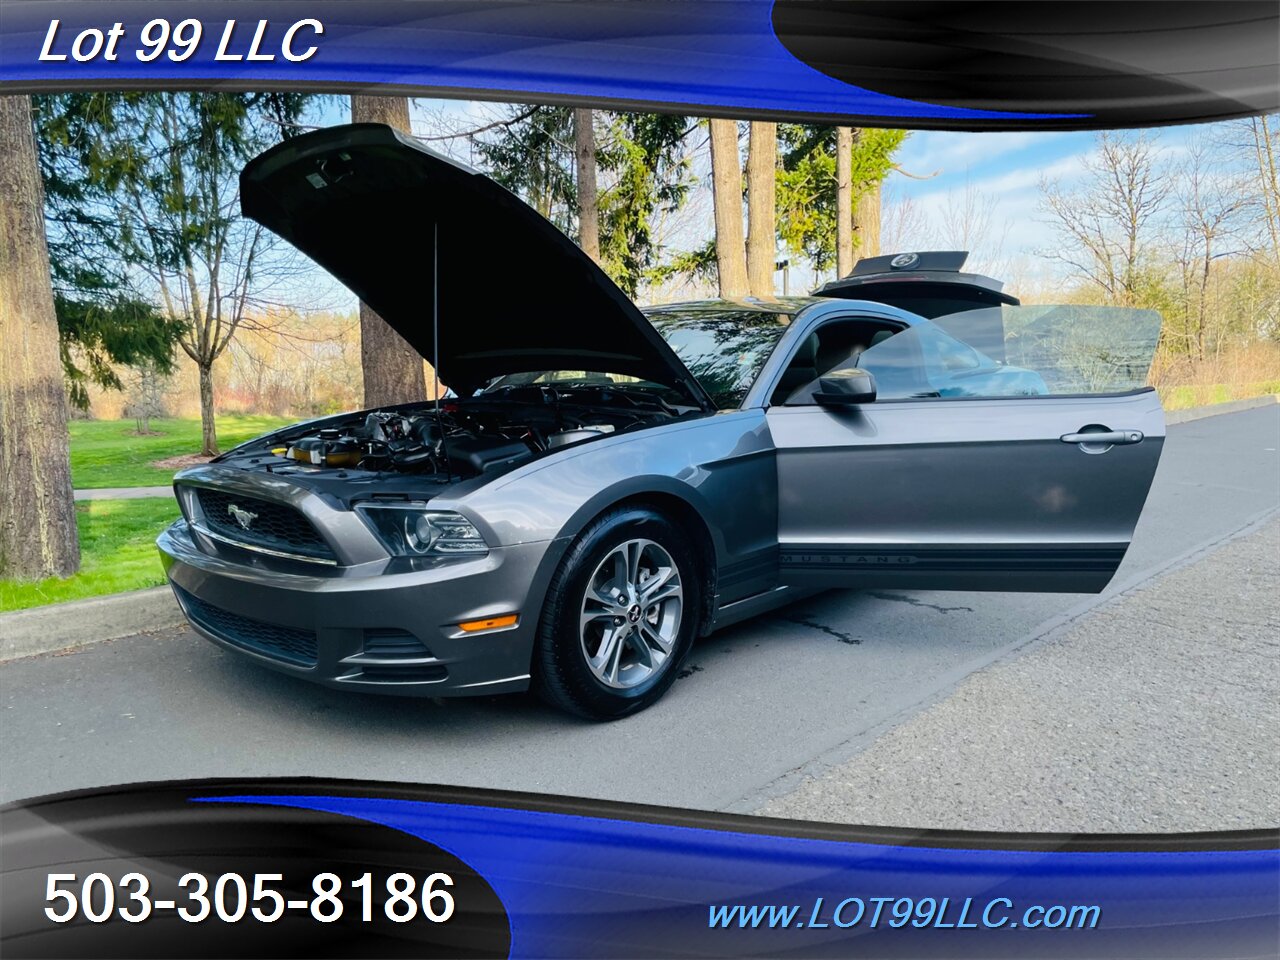 2014 Ford Mustang V6  3.7L V6 305hp  145k Miles Auto, 6-Spd SelectSh   - Photo 33 - Milwaukie, OR 97267